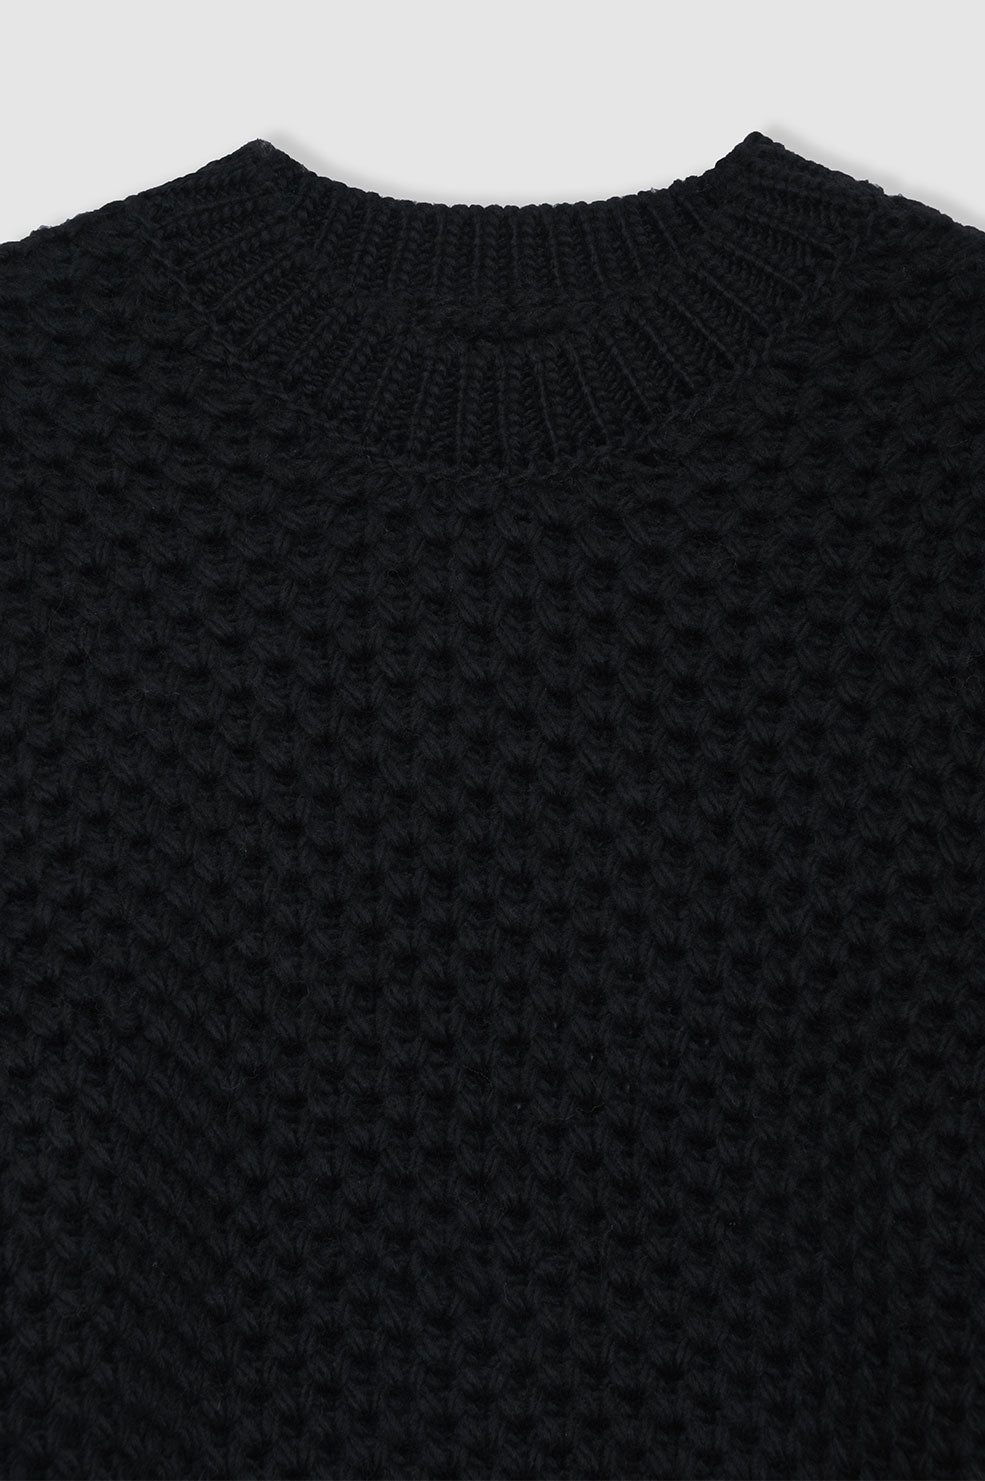 ANINE BING Brittany Sweater - Black - Detail View